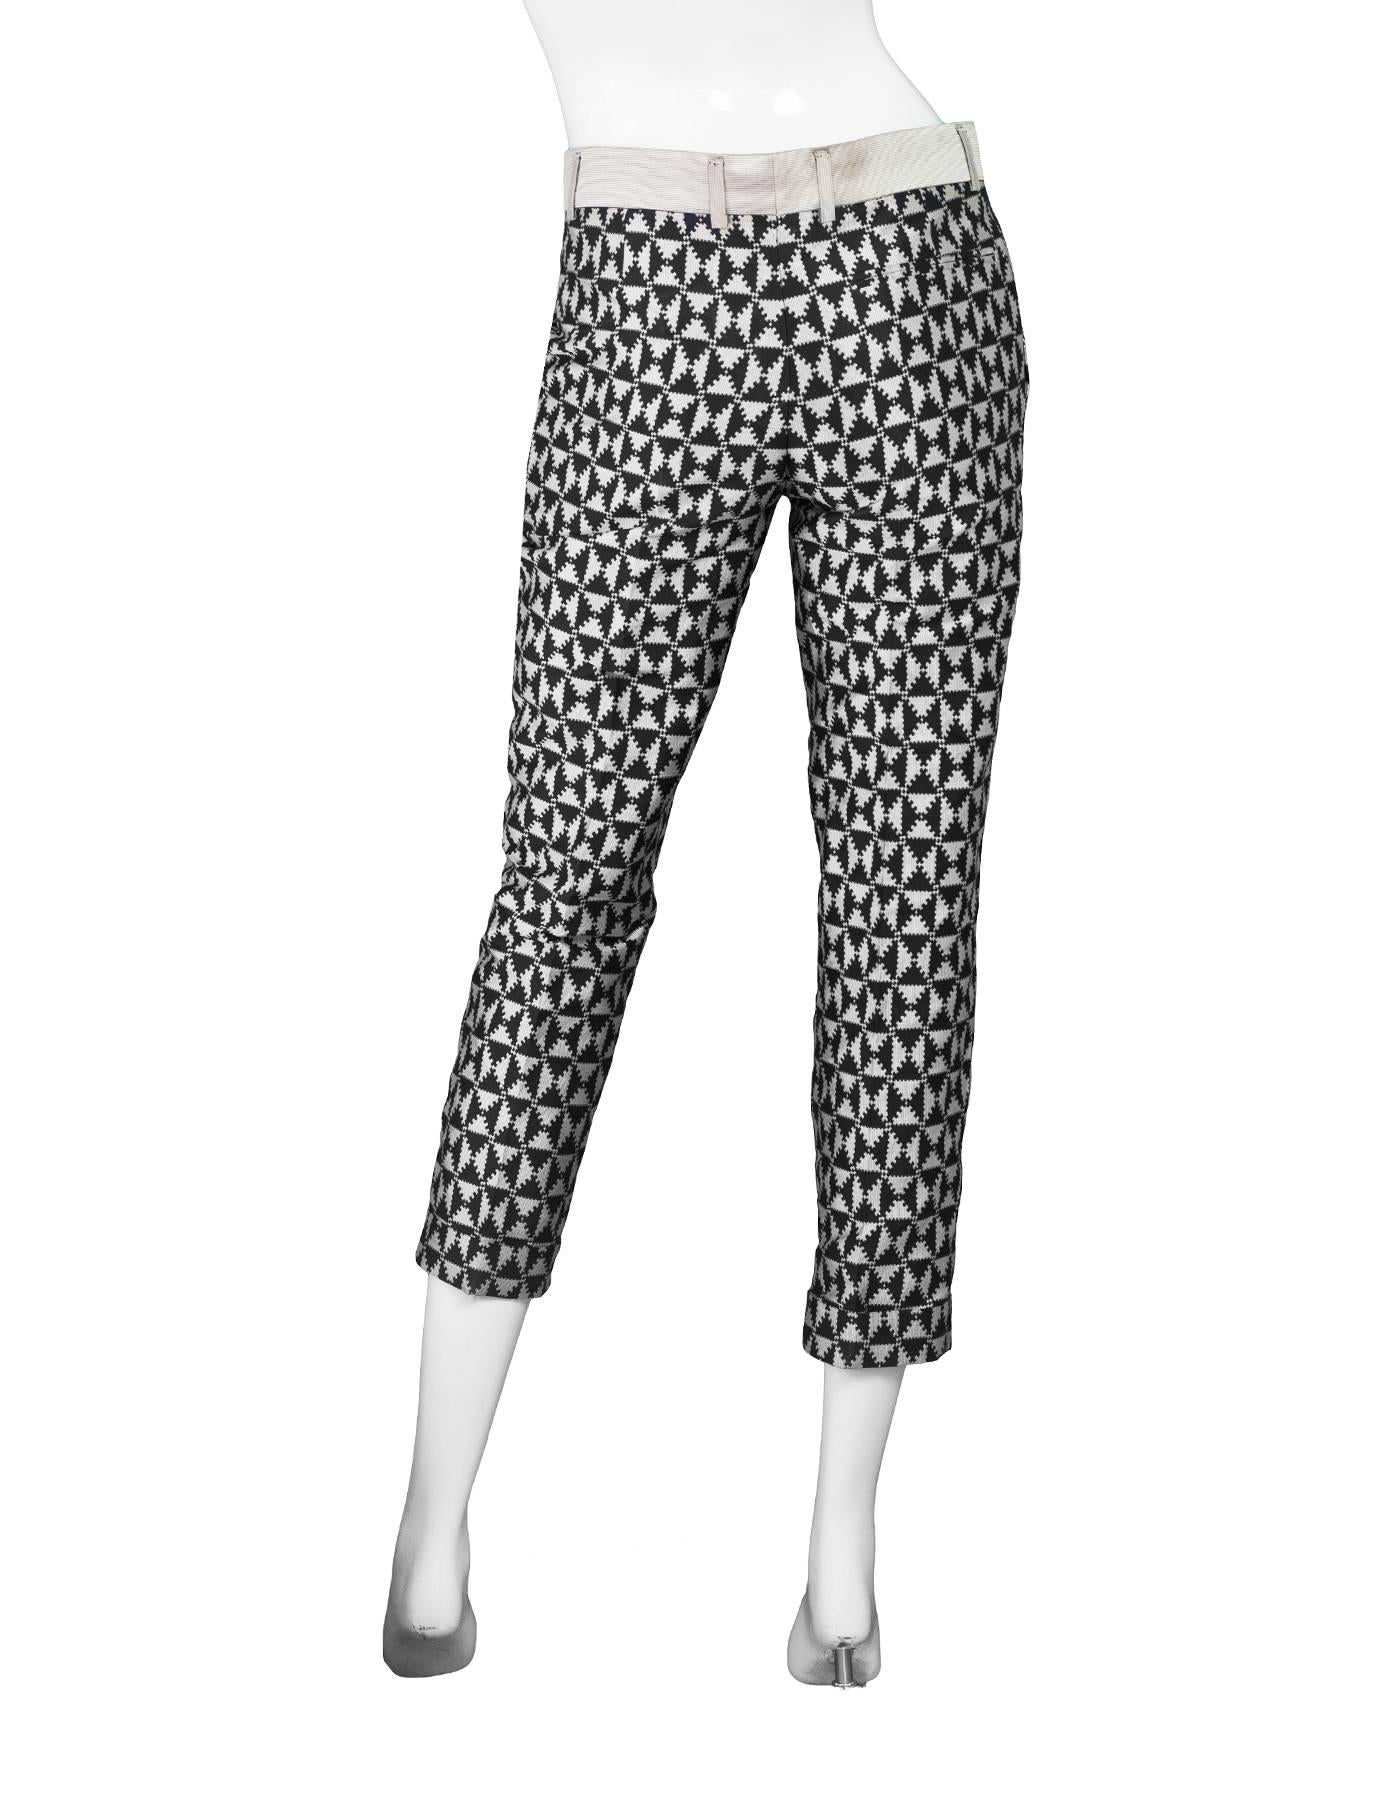 Haider Ackermann Black and Silver Print Pants Sz FR34 In Excellent Condition In New York, NY